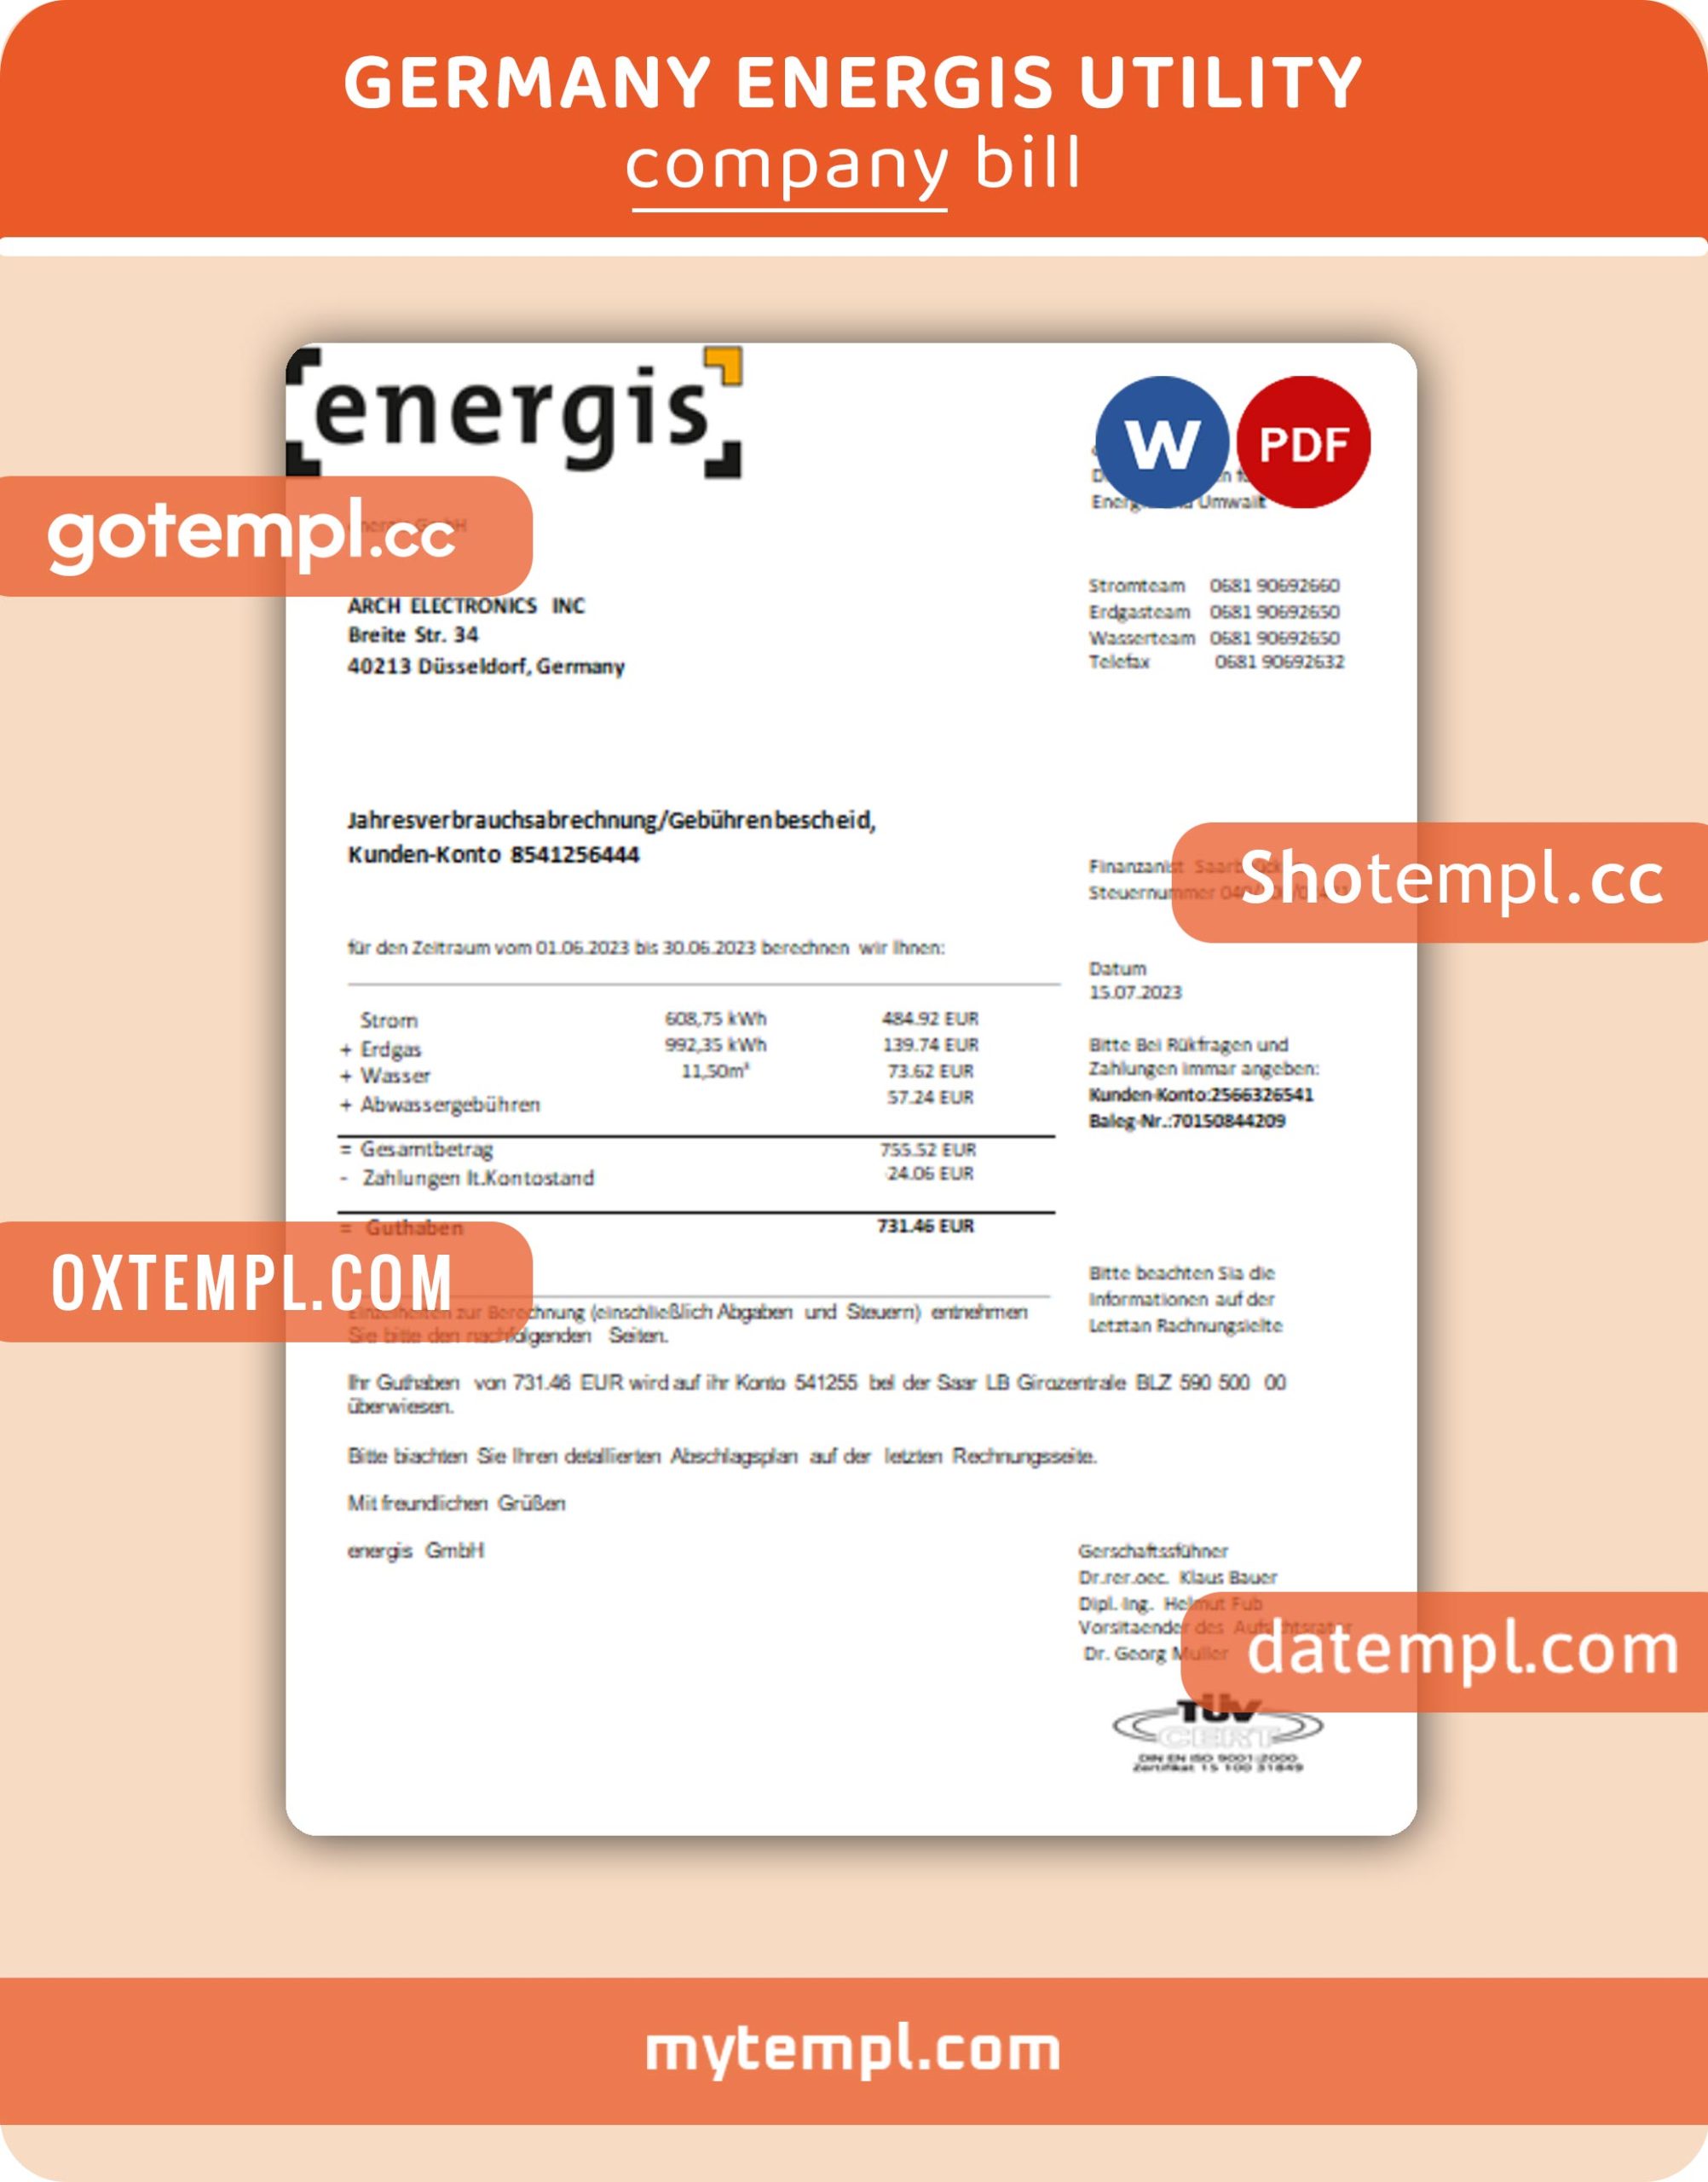 Germany Energis business utility bill, Word and PDF template, 4 pages, version 3